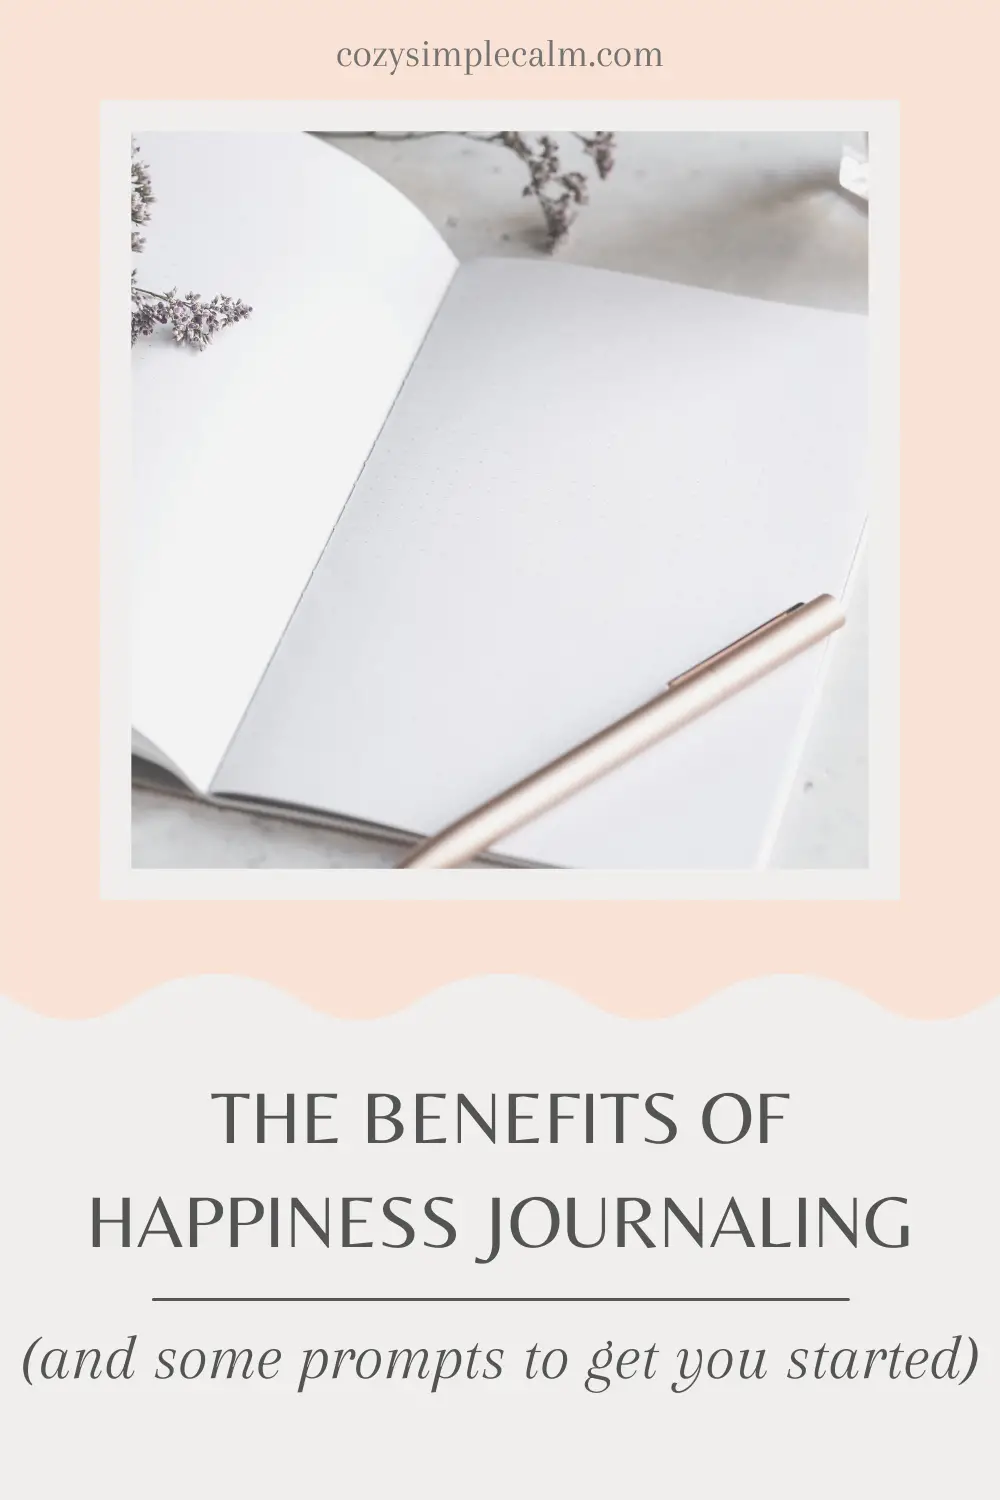 Image of gold pen sitting on open notebook with blank pages - Text overlay: The benefits of happiness journaling (and some prompts to get you started)